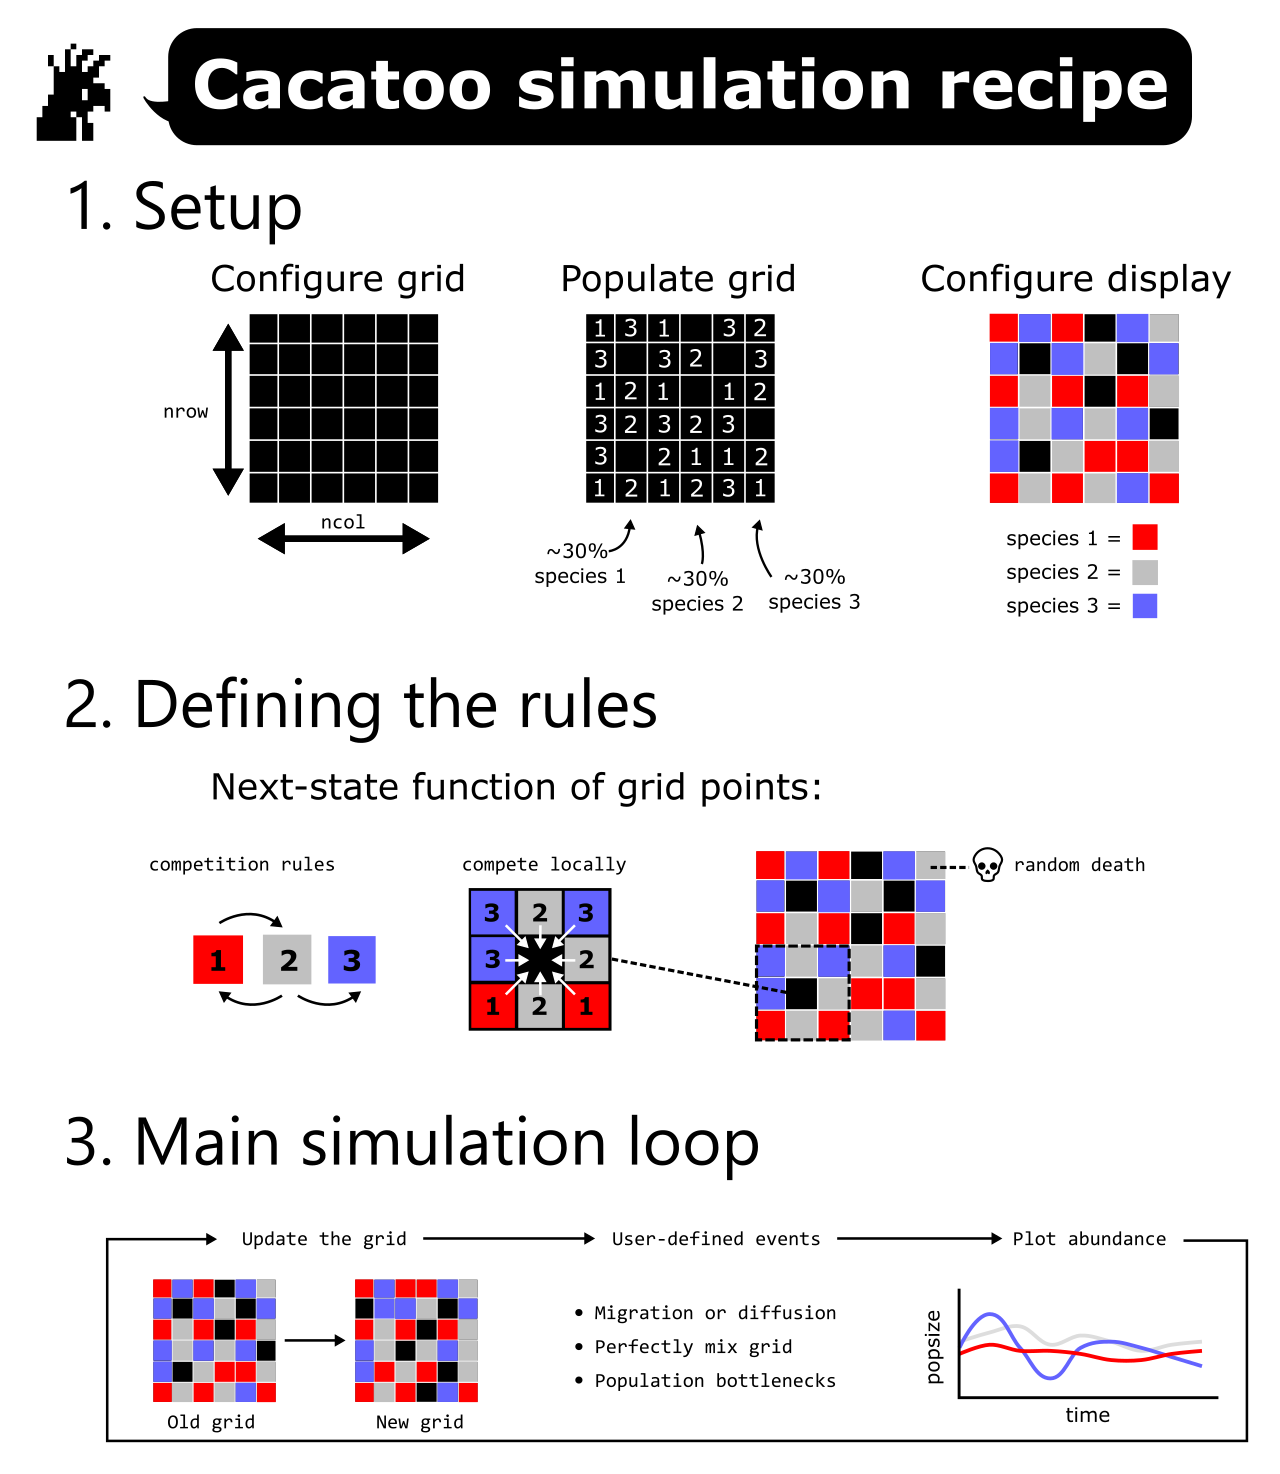 The basic recipe of a Cacatoo simulation contains three ingredients: 1) setup, 2) defining the rules, and 3) setting up the main simulation loop.